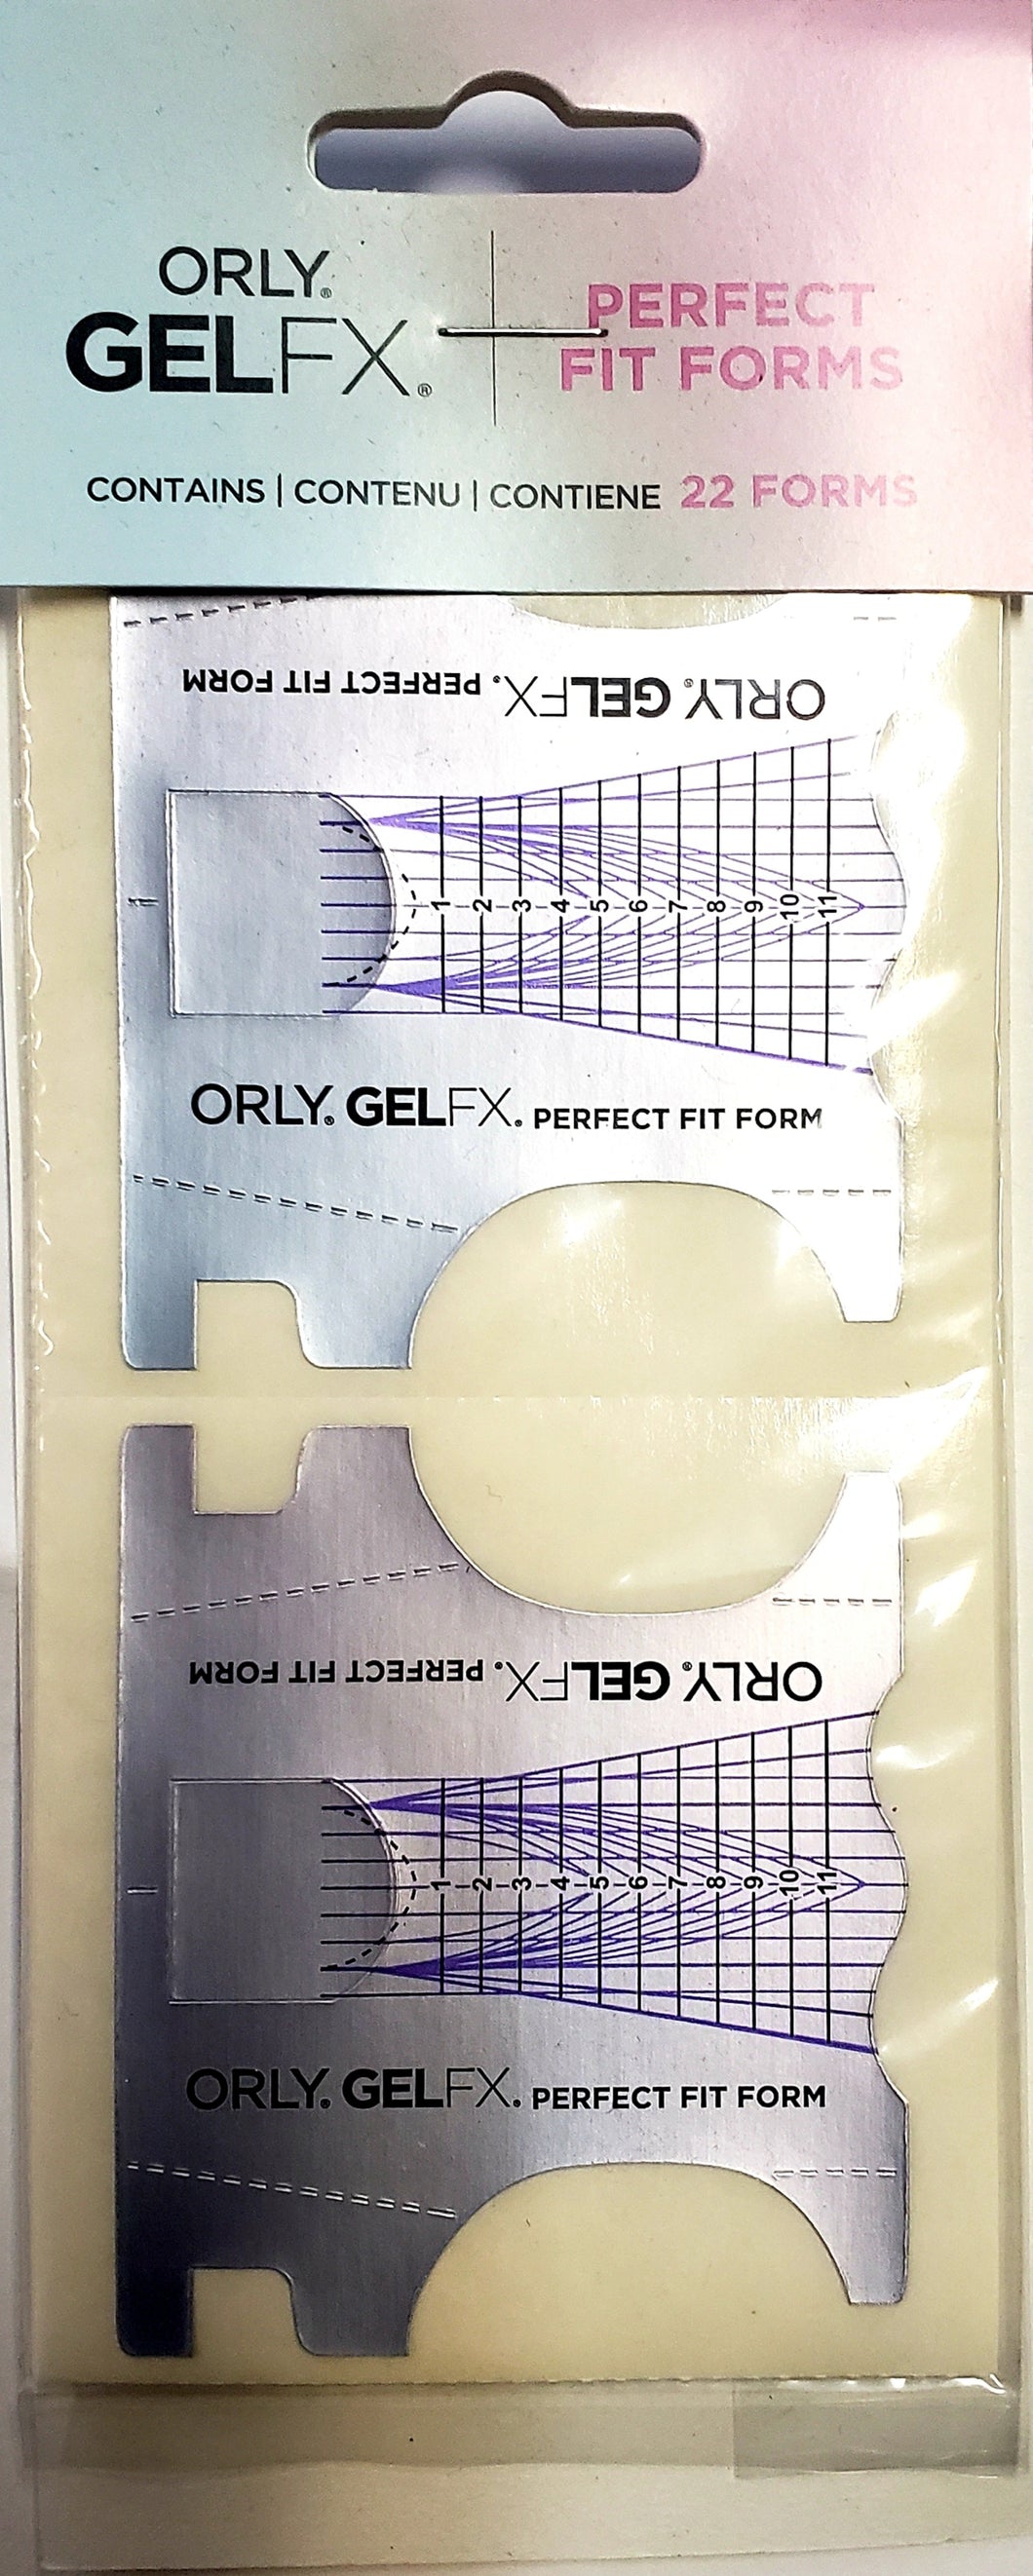 ORLY GEL FX PERFECT FIX NAIL FORM 22/PACK #3350003-Beauty Zone Nail Supply